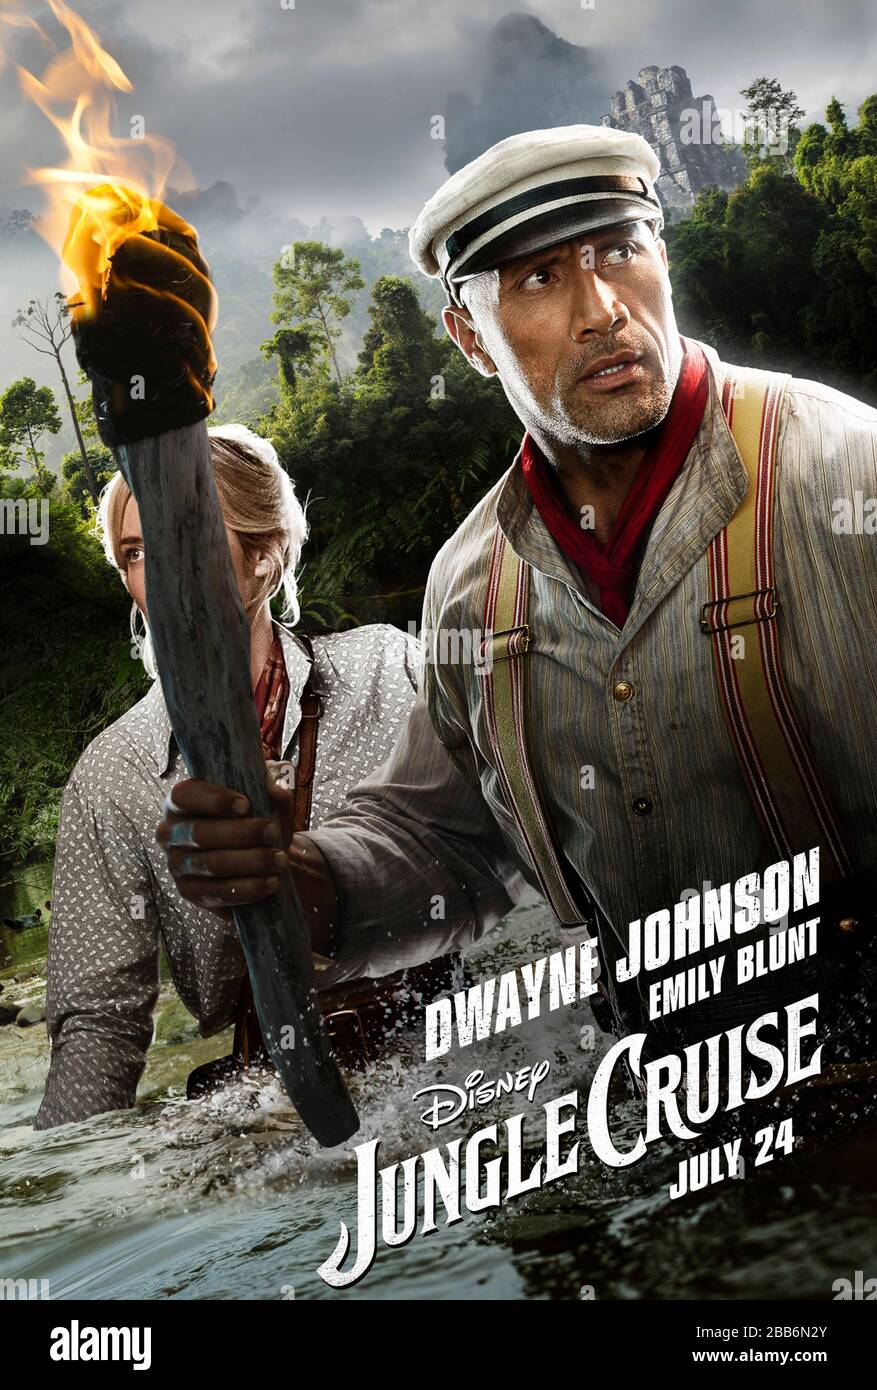 Jungle Cruise (2020) directed by Jaume Collet-Serra and starring Dwayne Johnson as Frank navigating his riverboat explorer through the Amazon rainforest in this big screen adventure based on Disneyland's theme park ride. Stock Photo